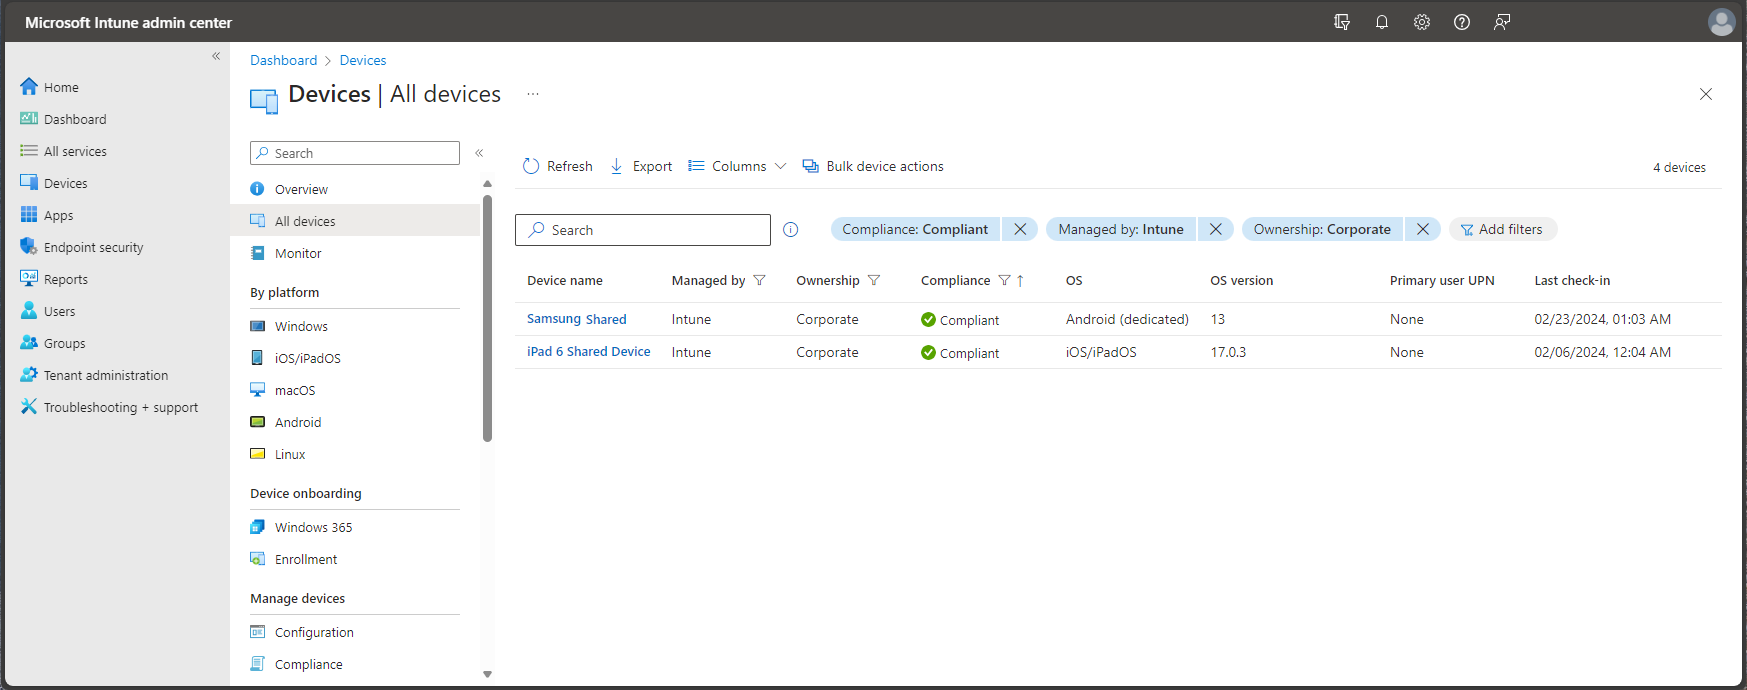 Screenshot of the Microsoft Intune admin center - All devices.